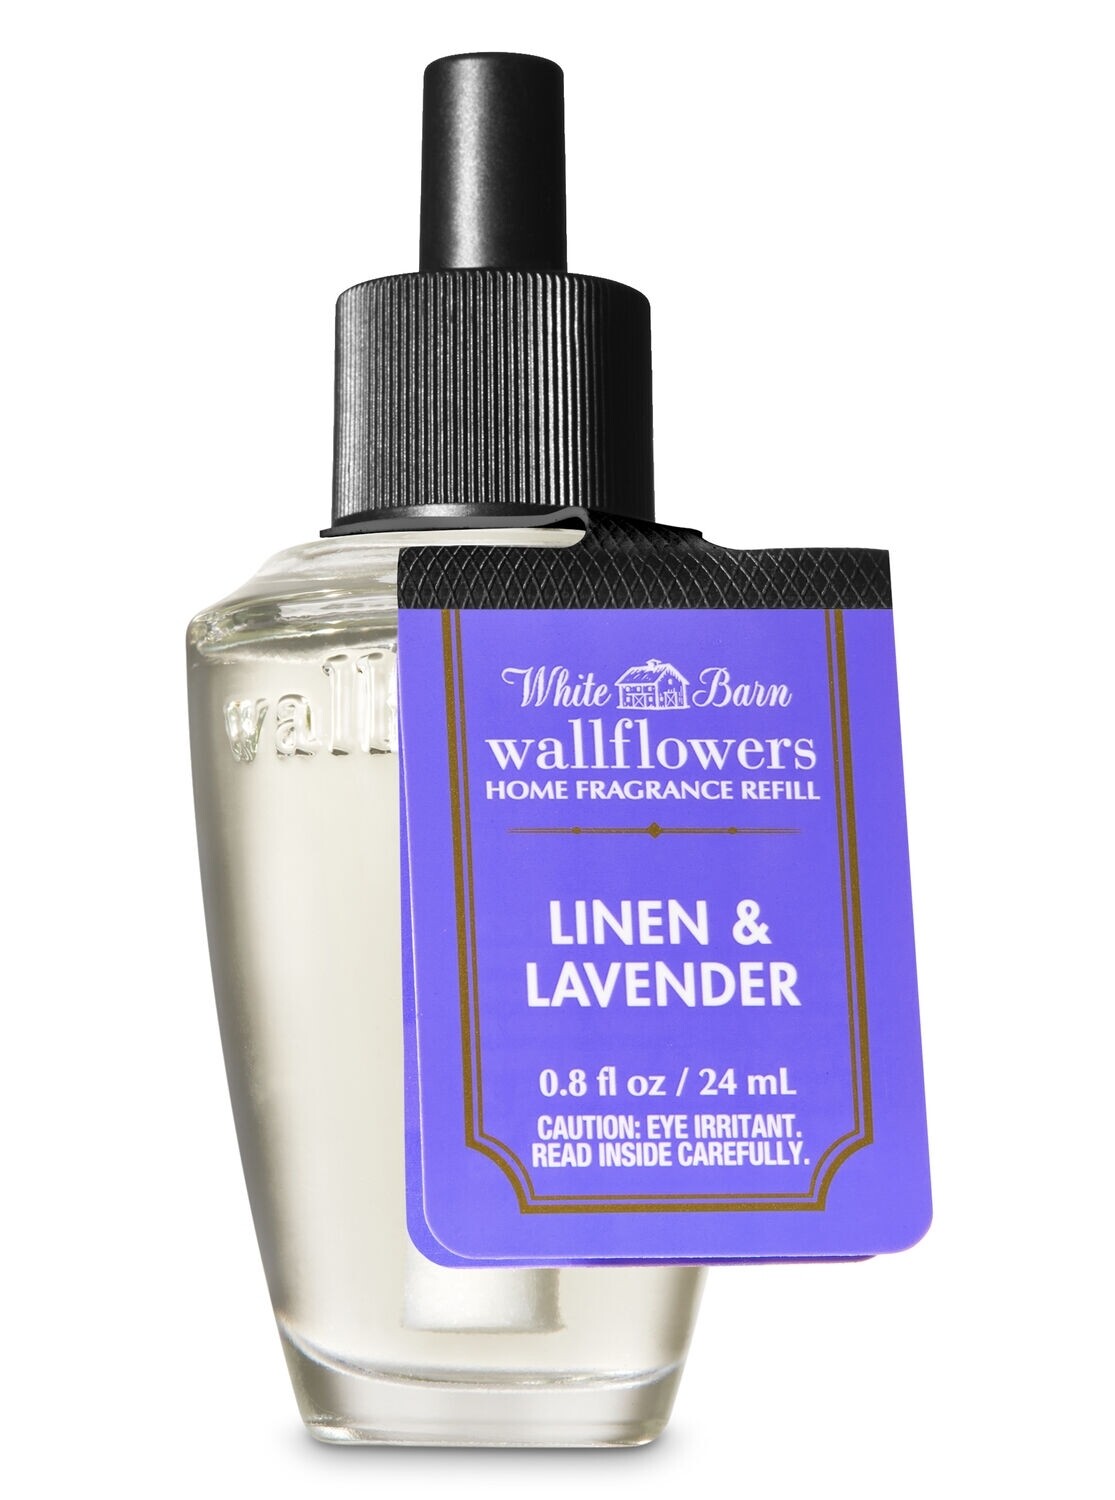 Bath and body works wallflower refill- linen and lavender